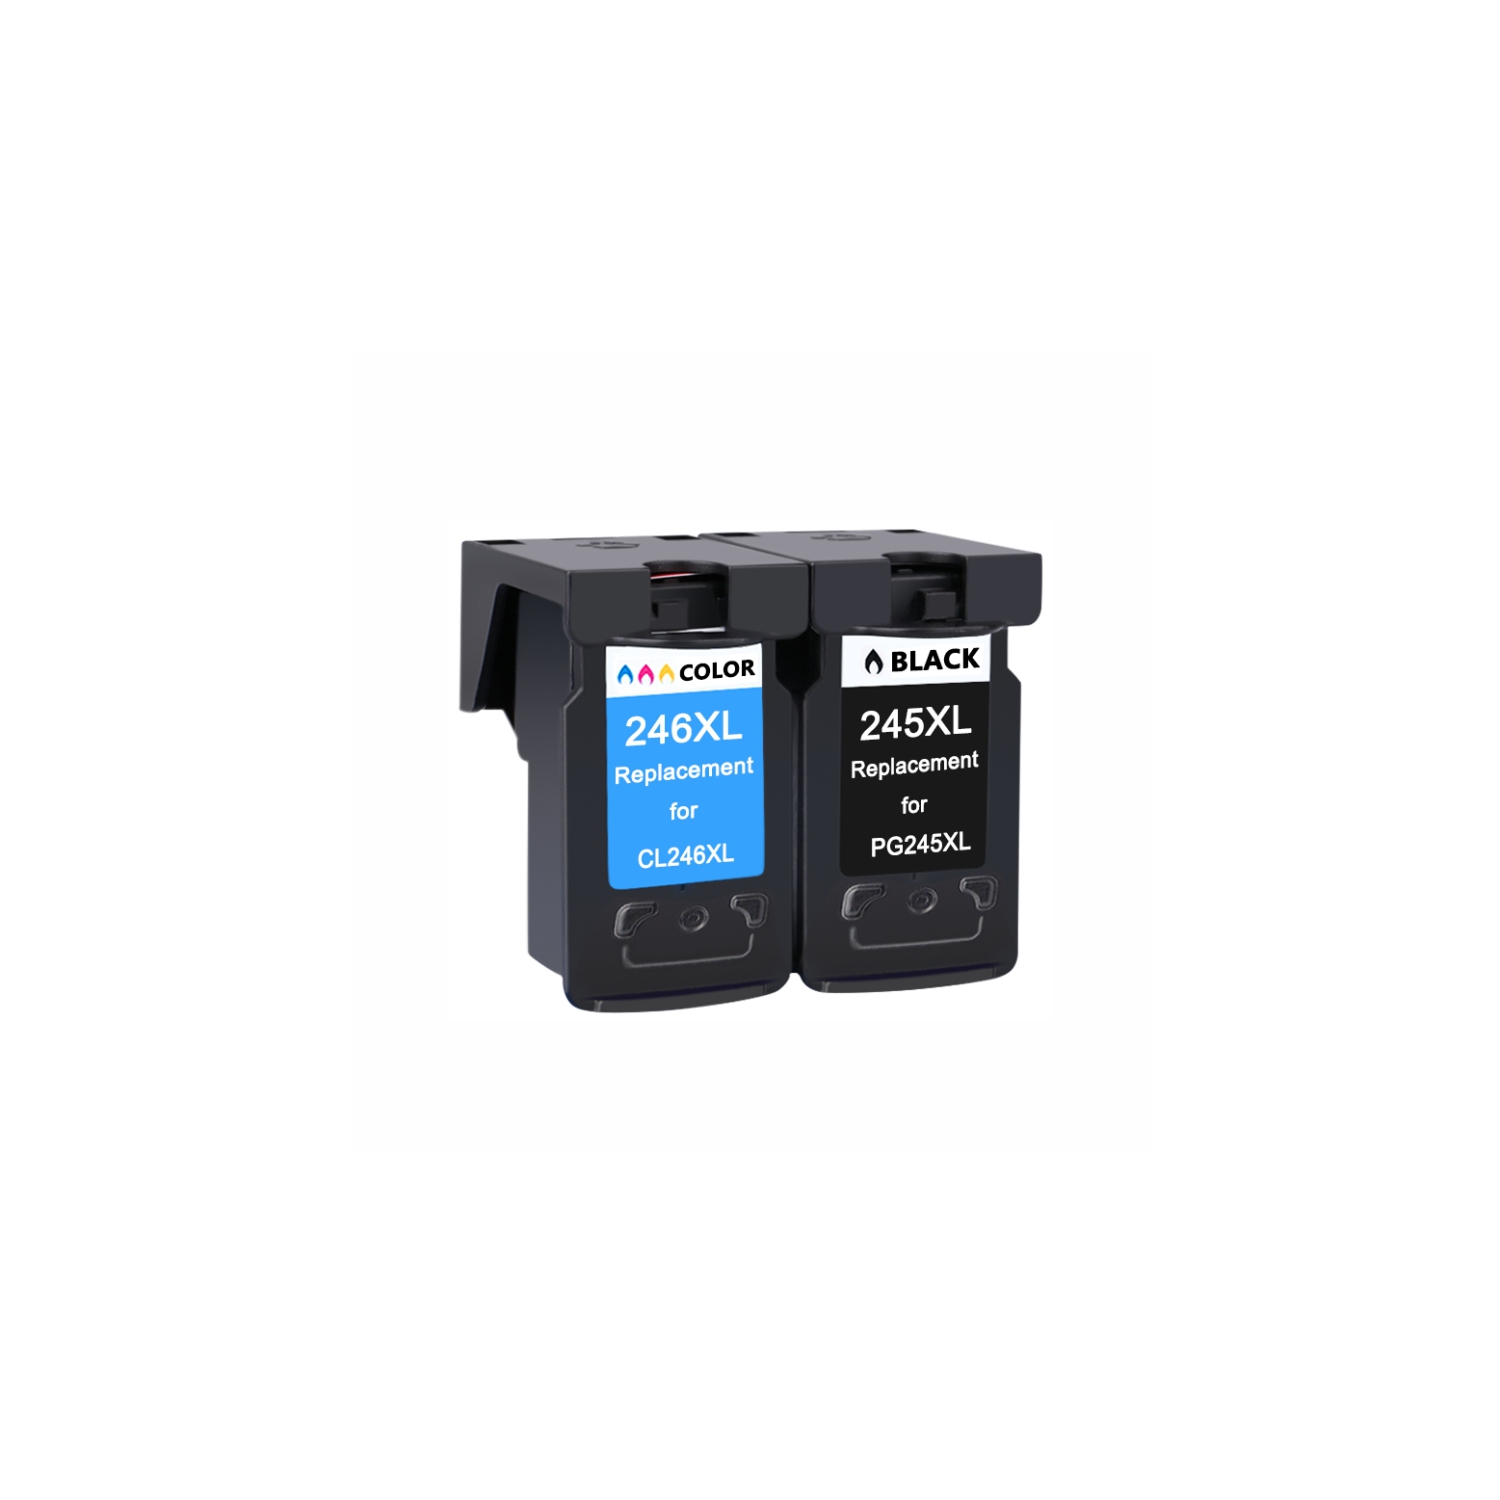 Gotoners™ Generic Packaged Canon PG-245XL CL-246XL Remanufactured Black and Color Ink Cartridge Combo for Canon MG2420,MG2520,MG2920,MG2924,MX492